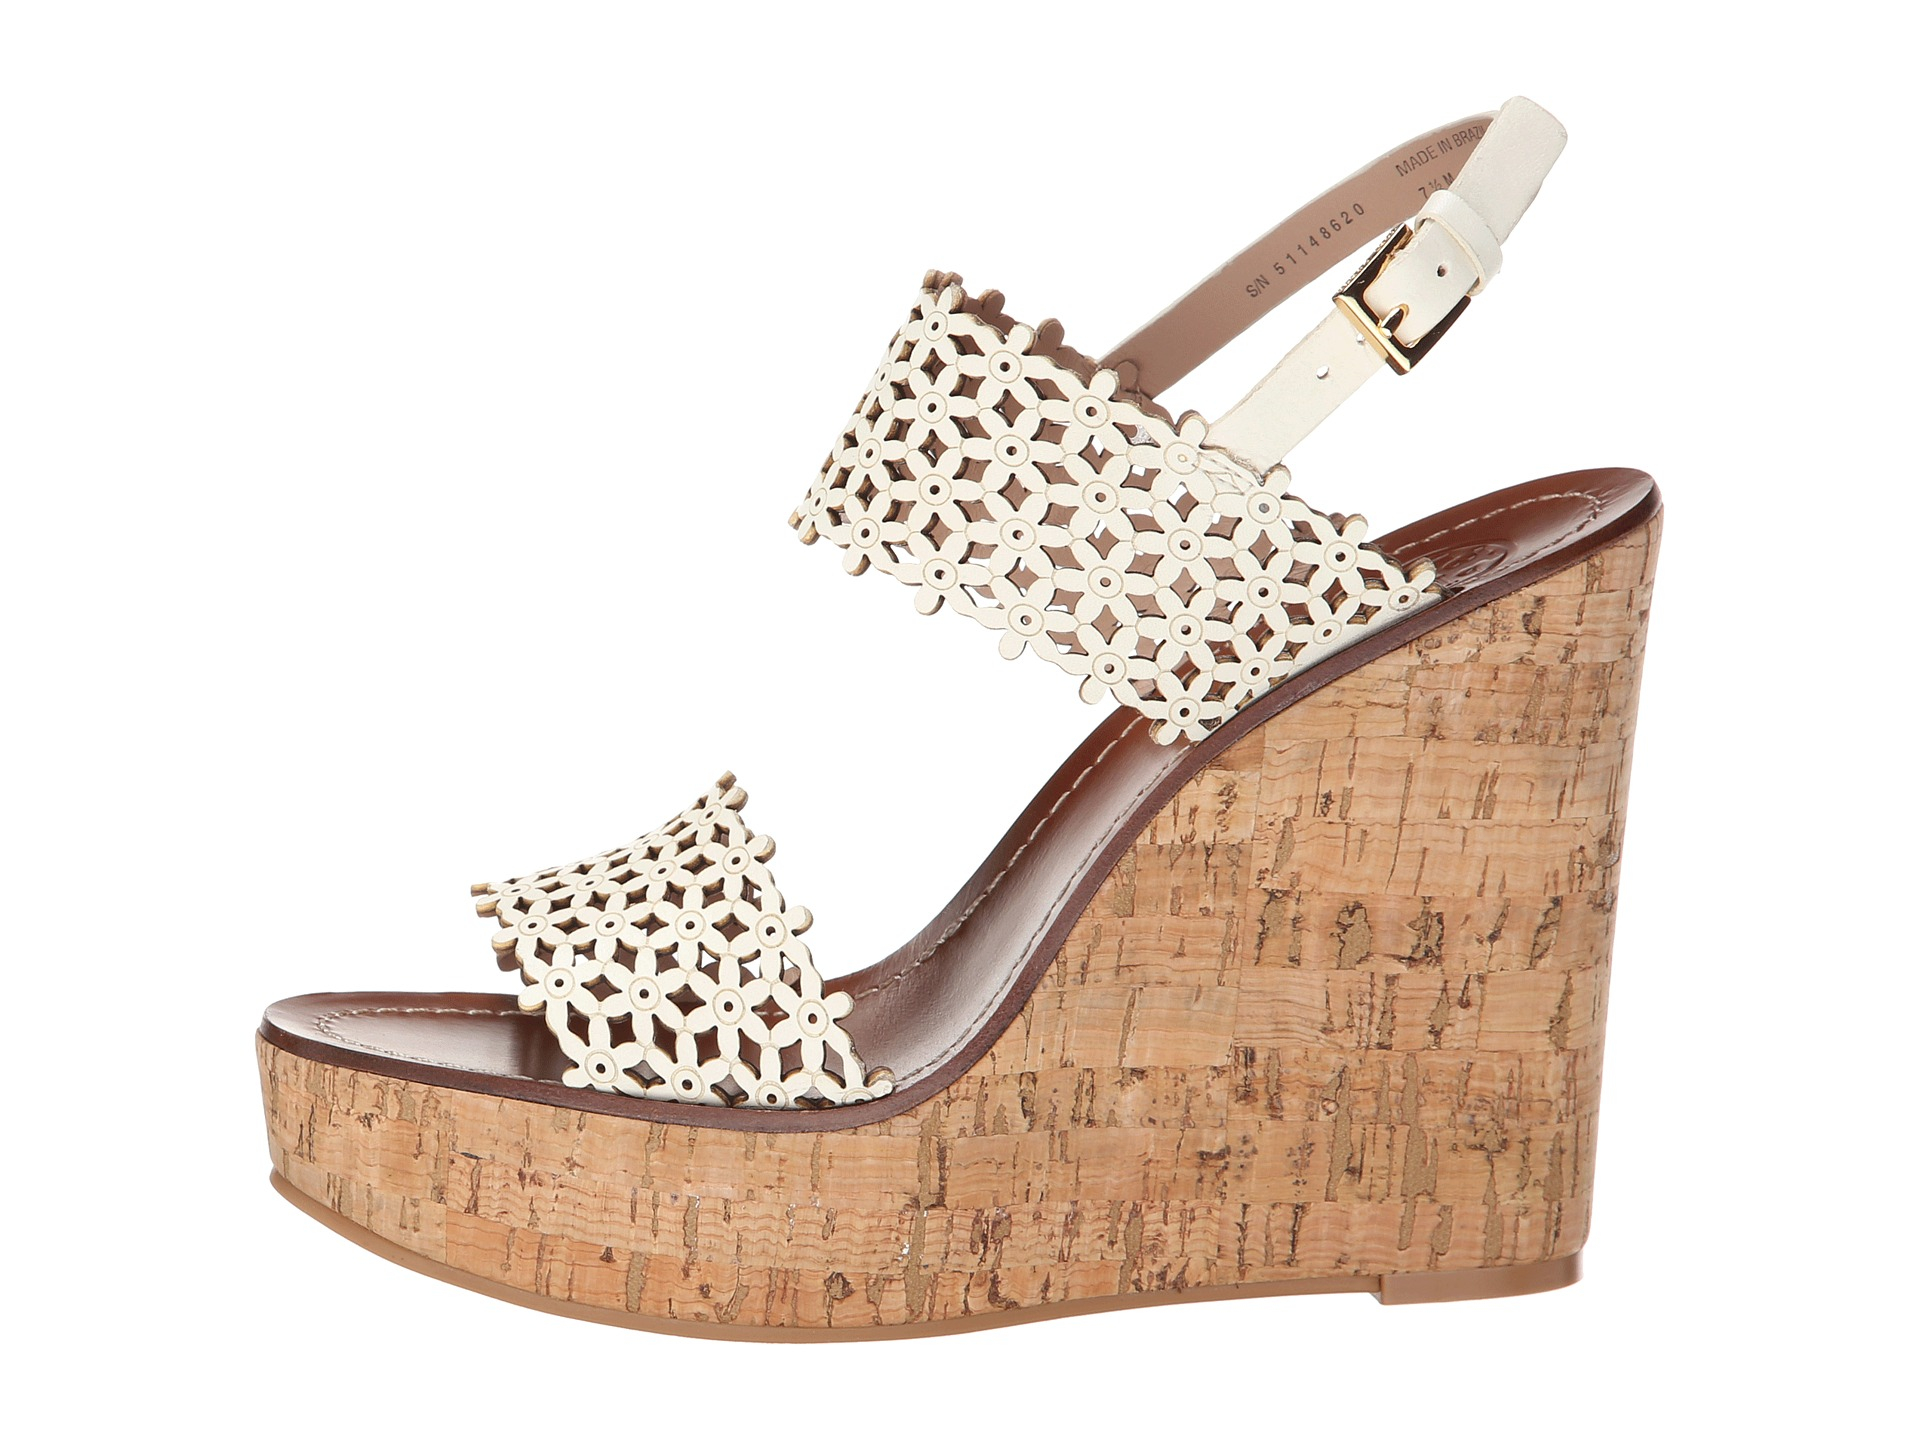 Tory Burch Daisy Wedge Sandals in Ivory 